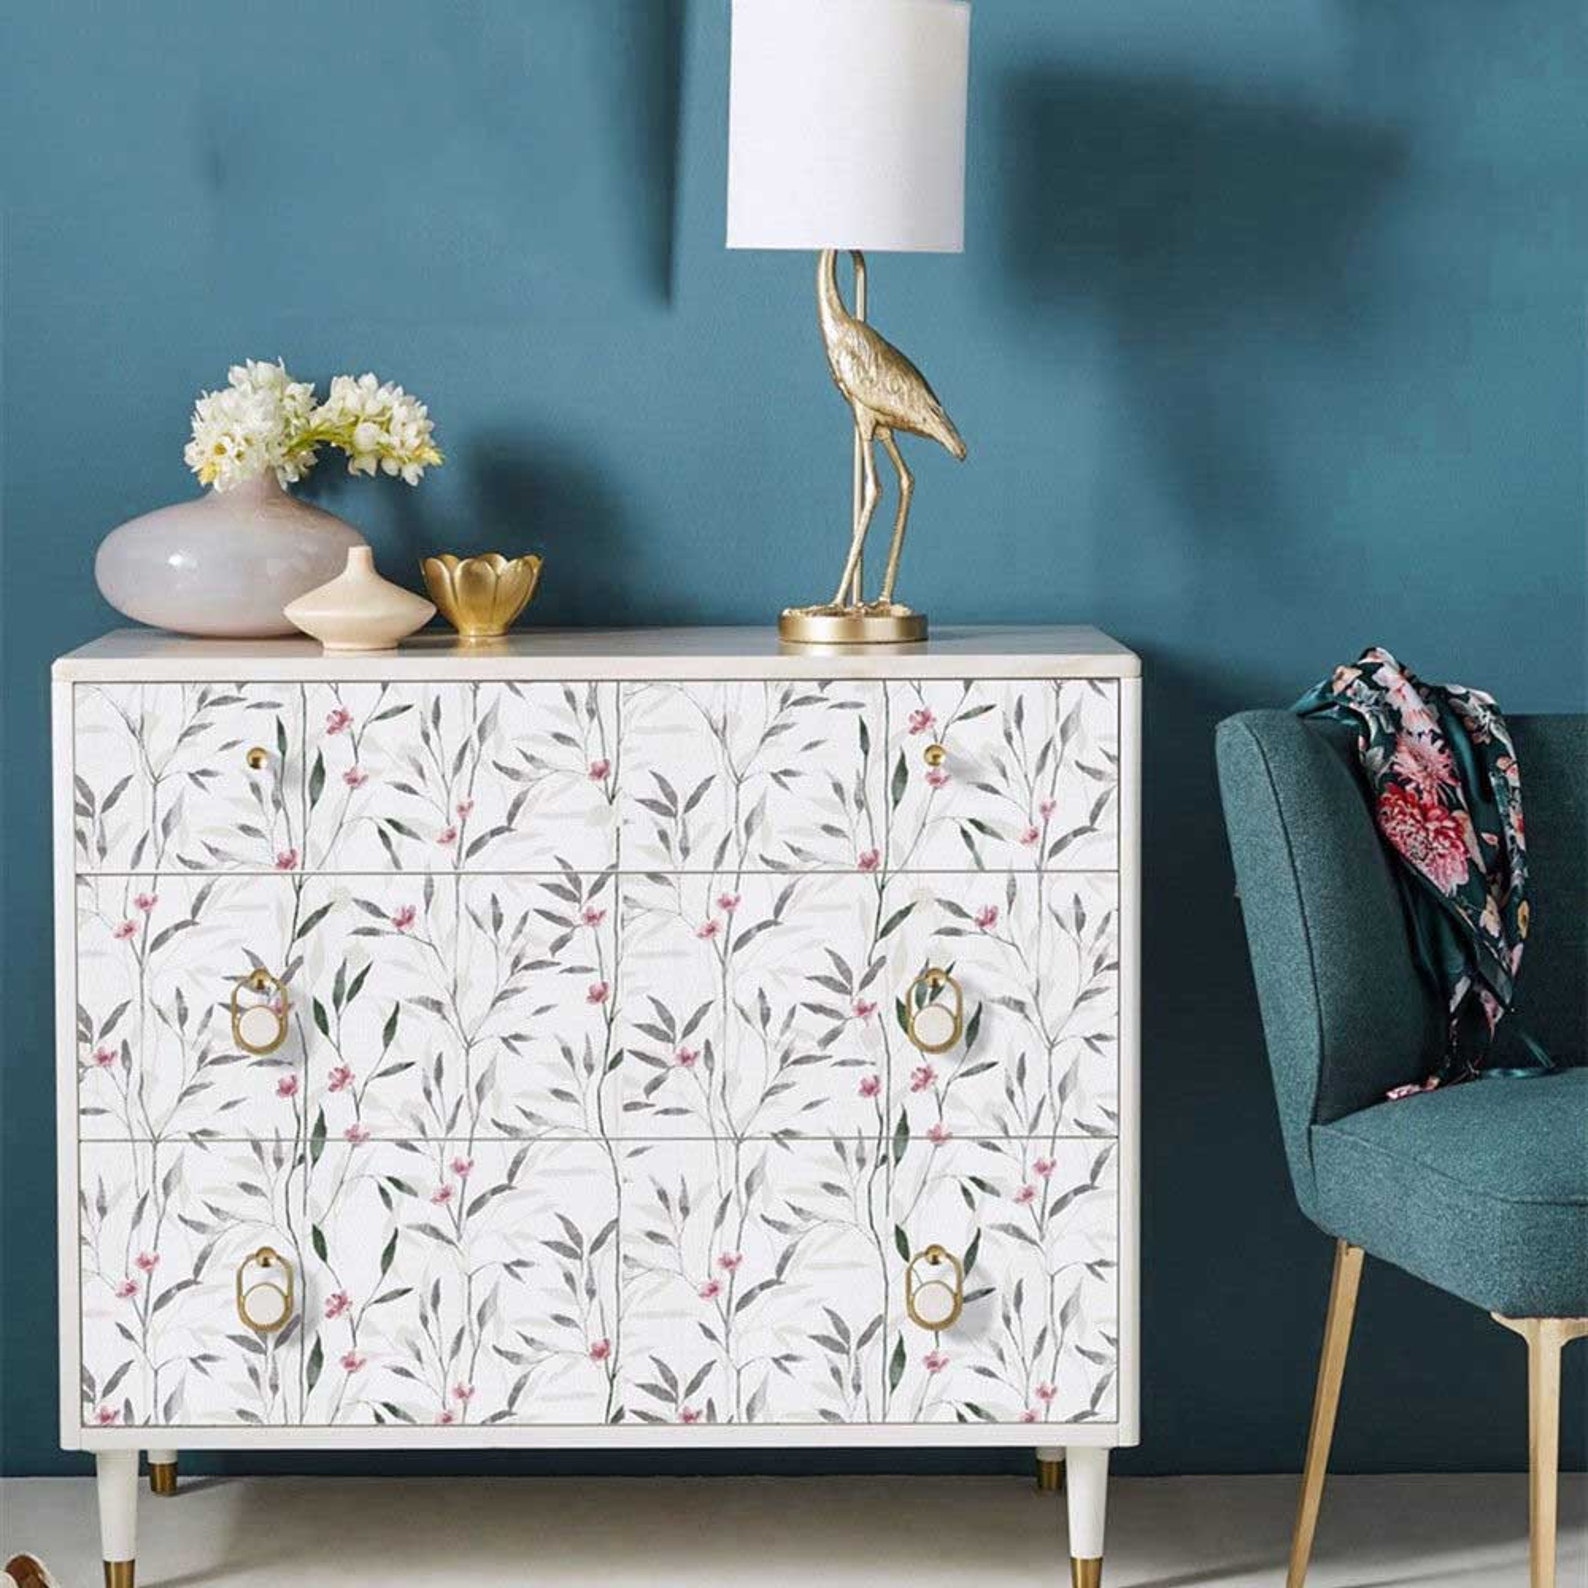 Modern Floral Wallpaper Peel And Stick Removable Cabinet | Etsy